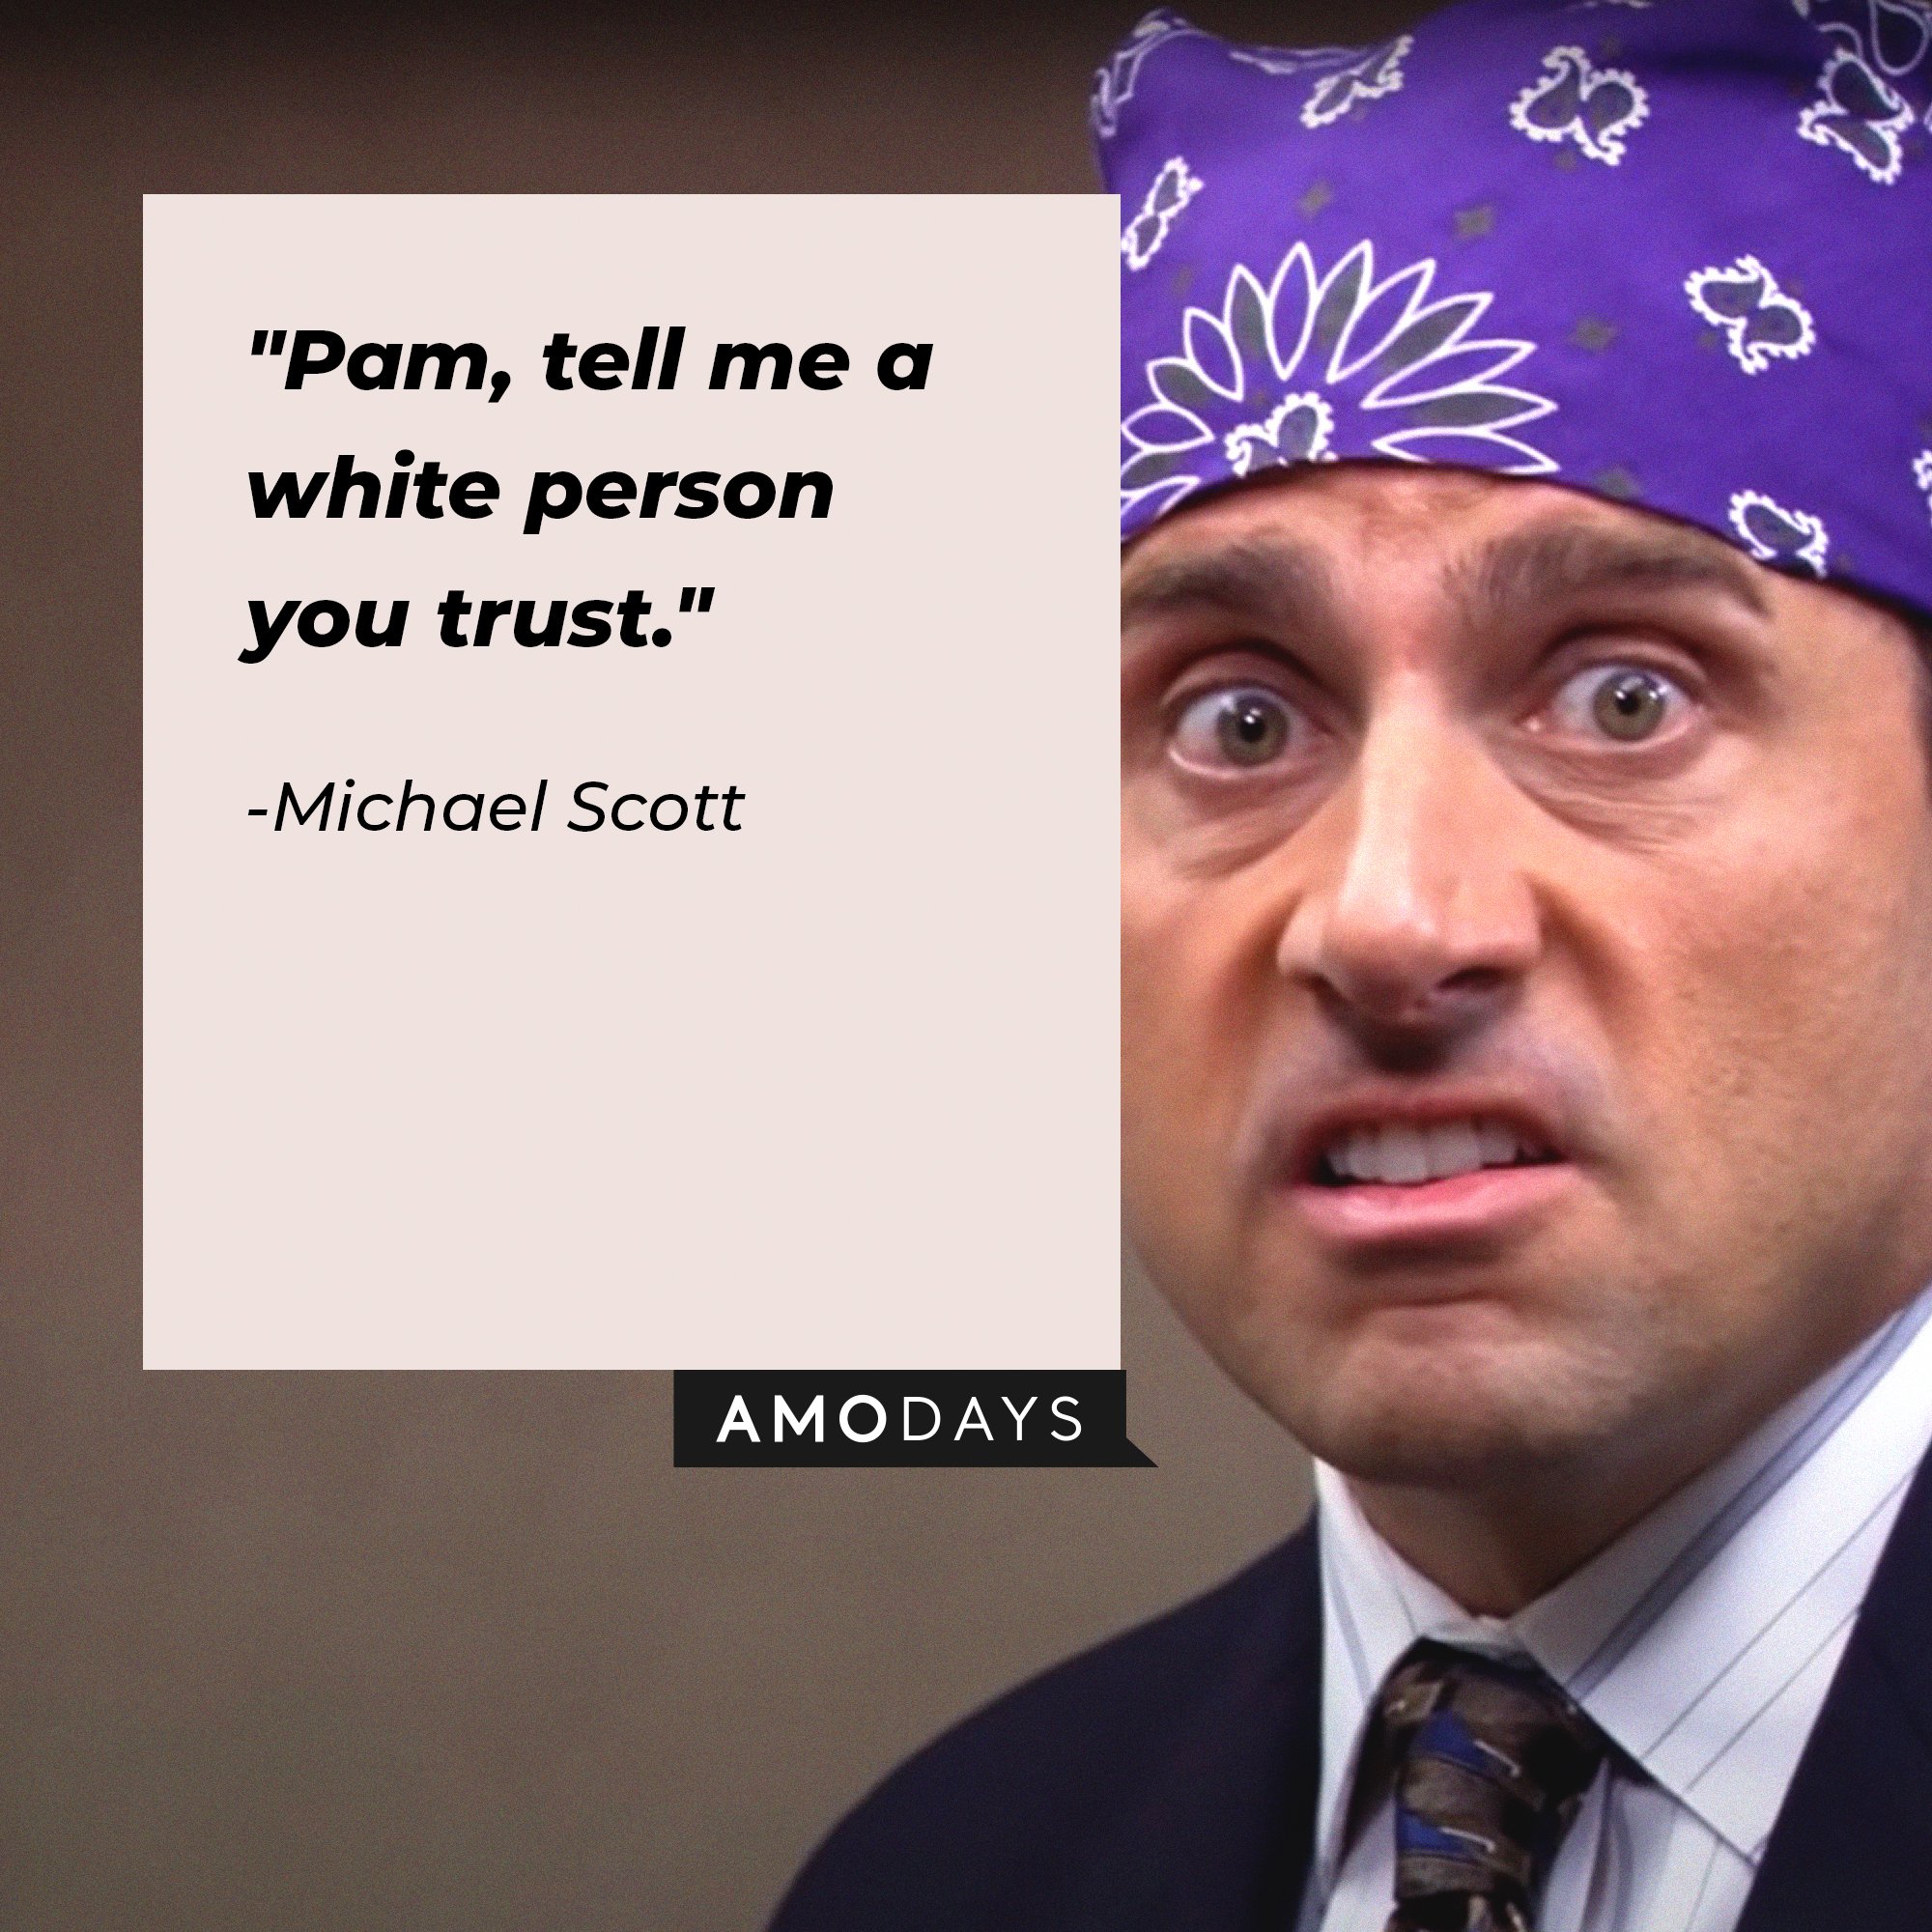 Michael Scott’s quote: "Pam, tell me a white person you trust." | Image: AmoDays